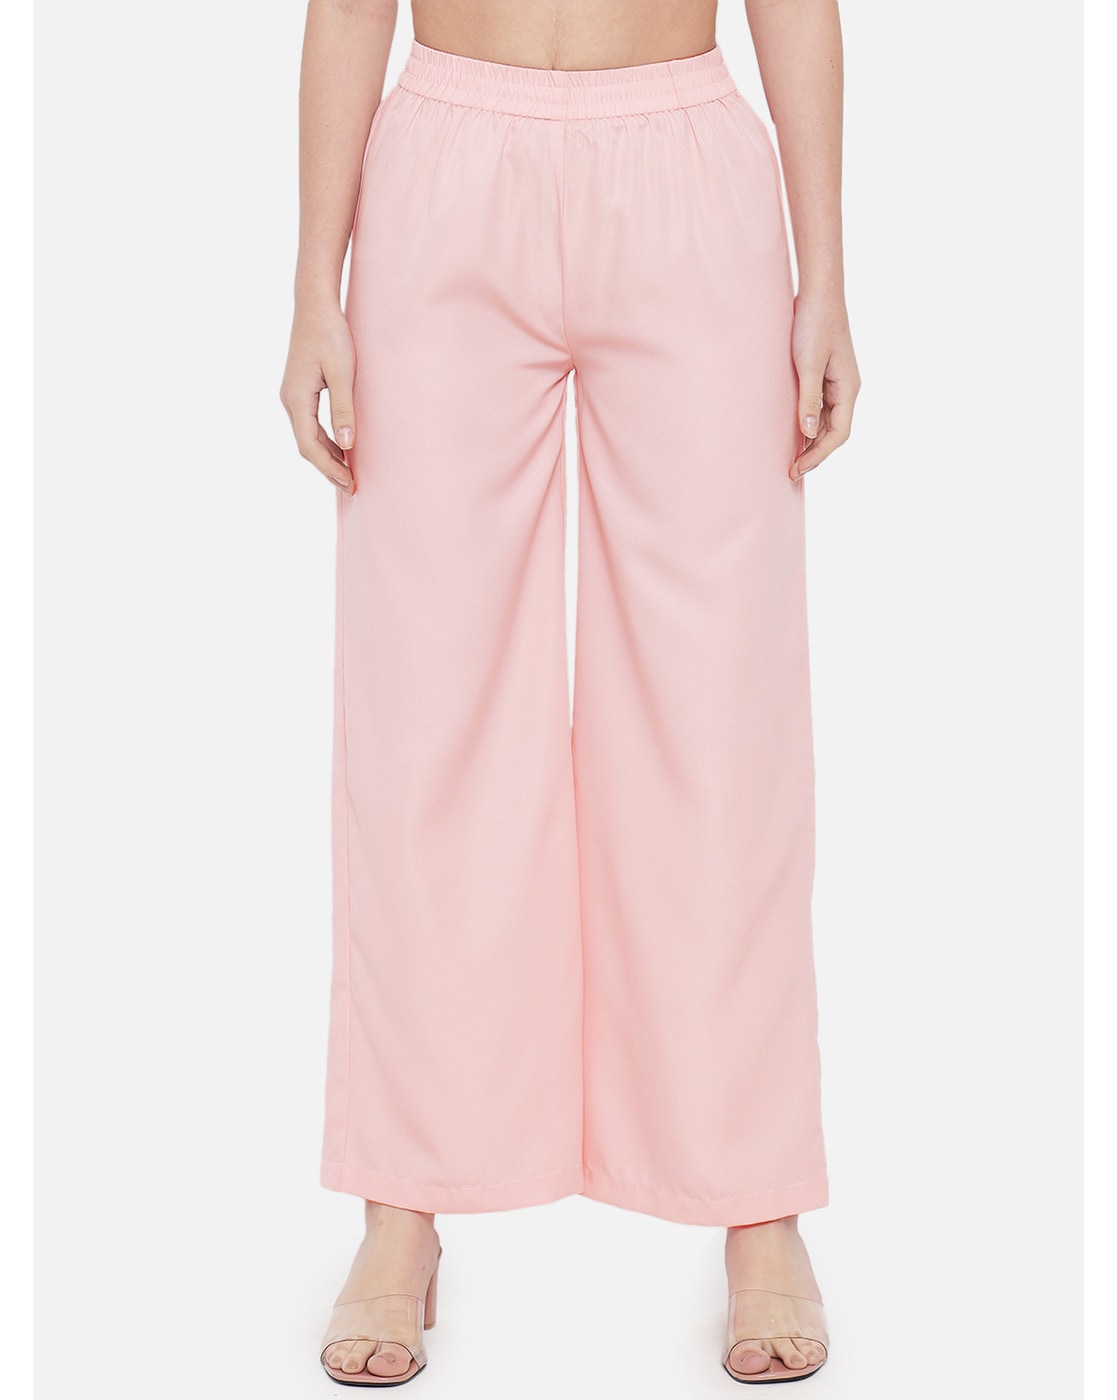 Buy Baby Pink Palazzo Pant Cotton Silk for Best Price, Reviews, Free  Shipping